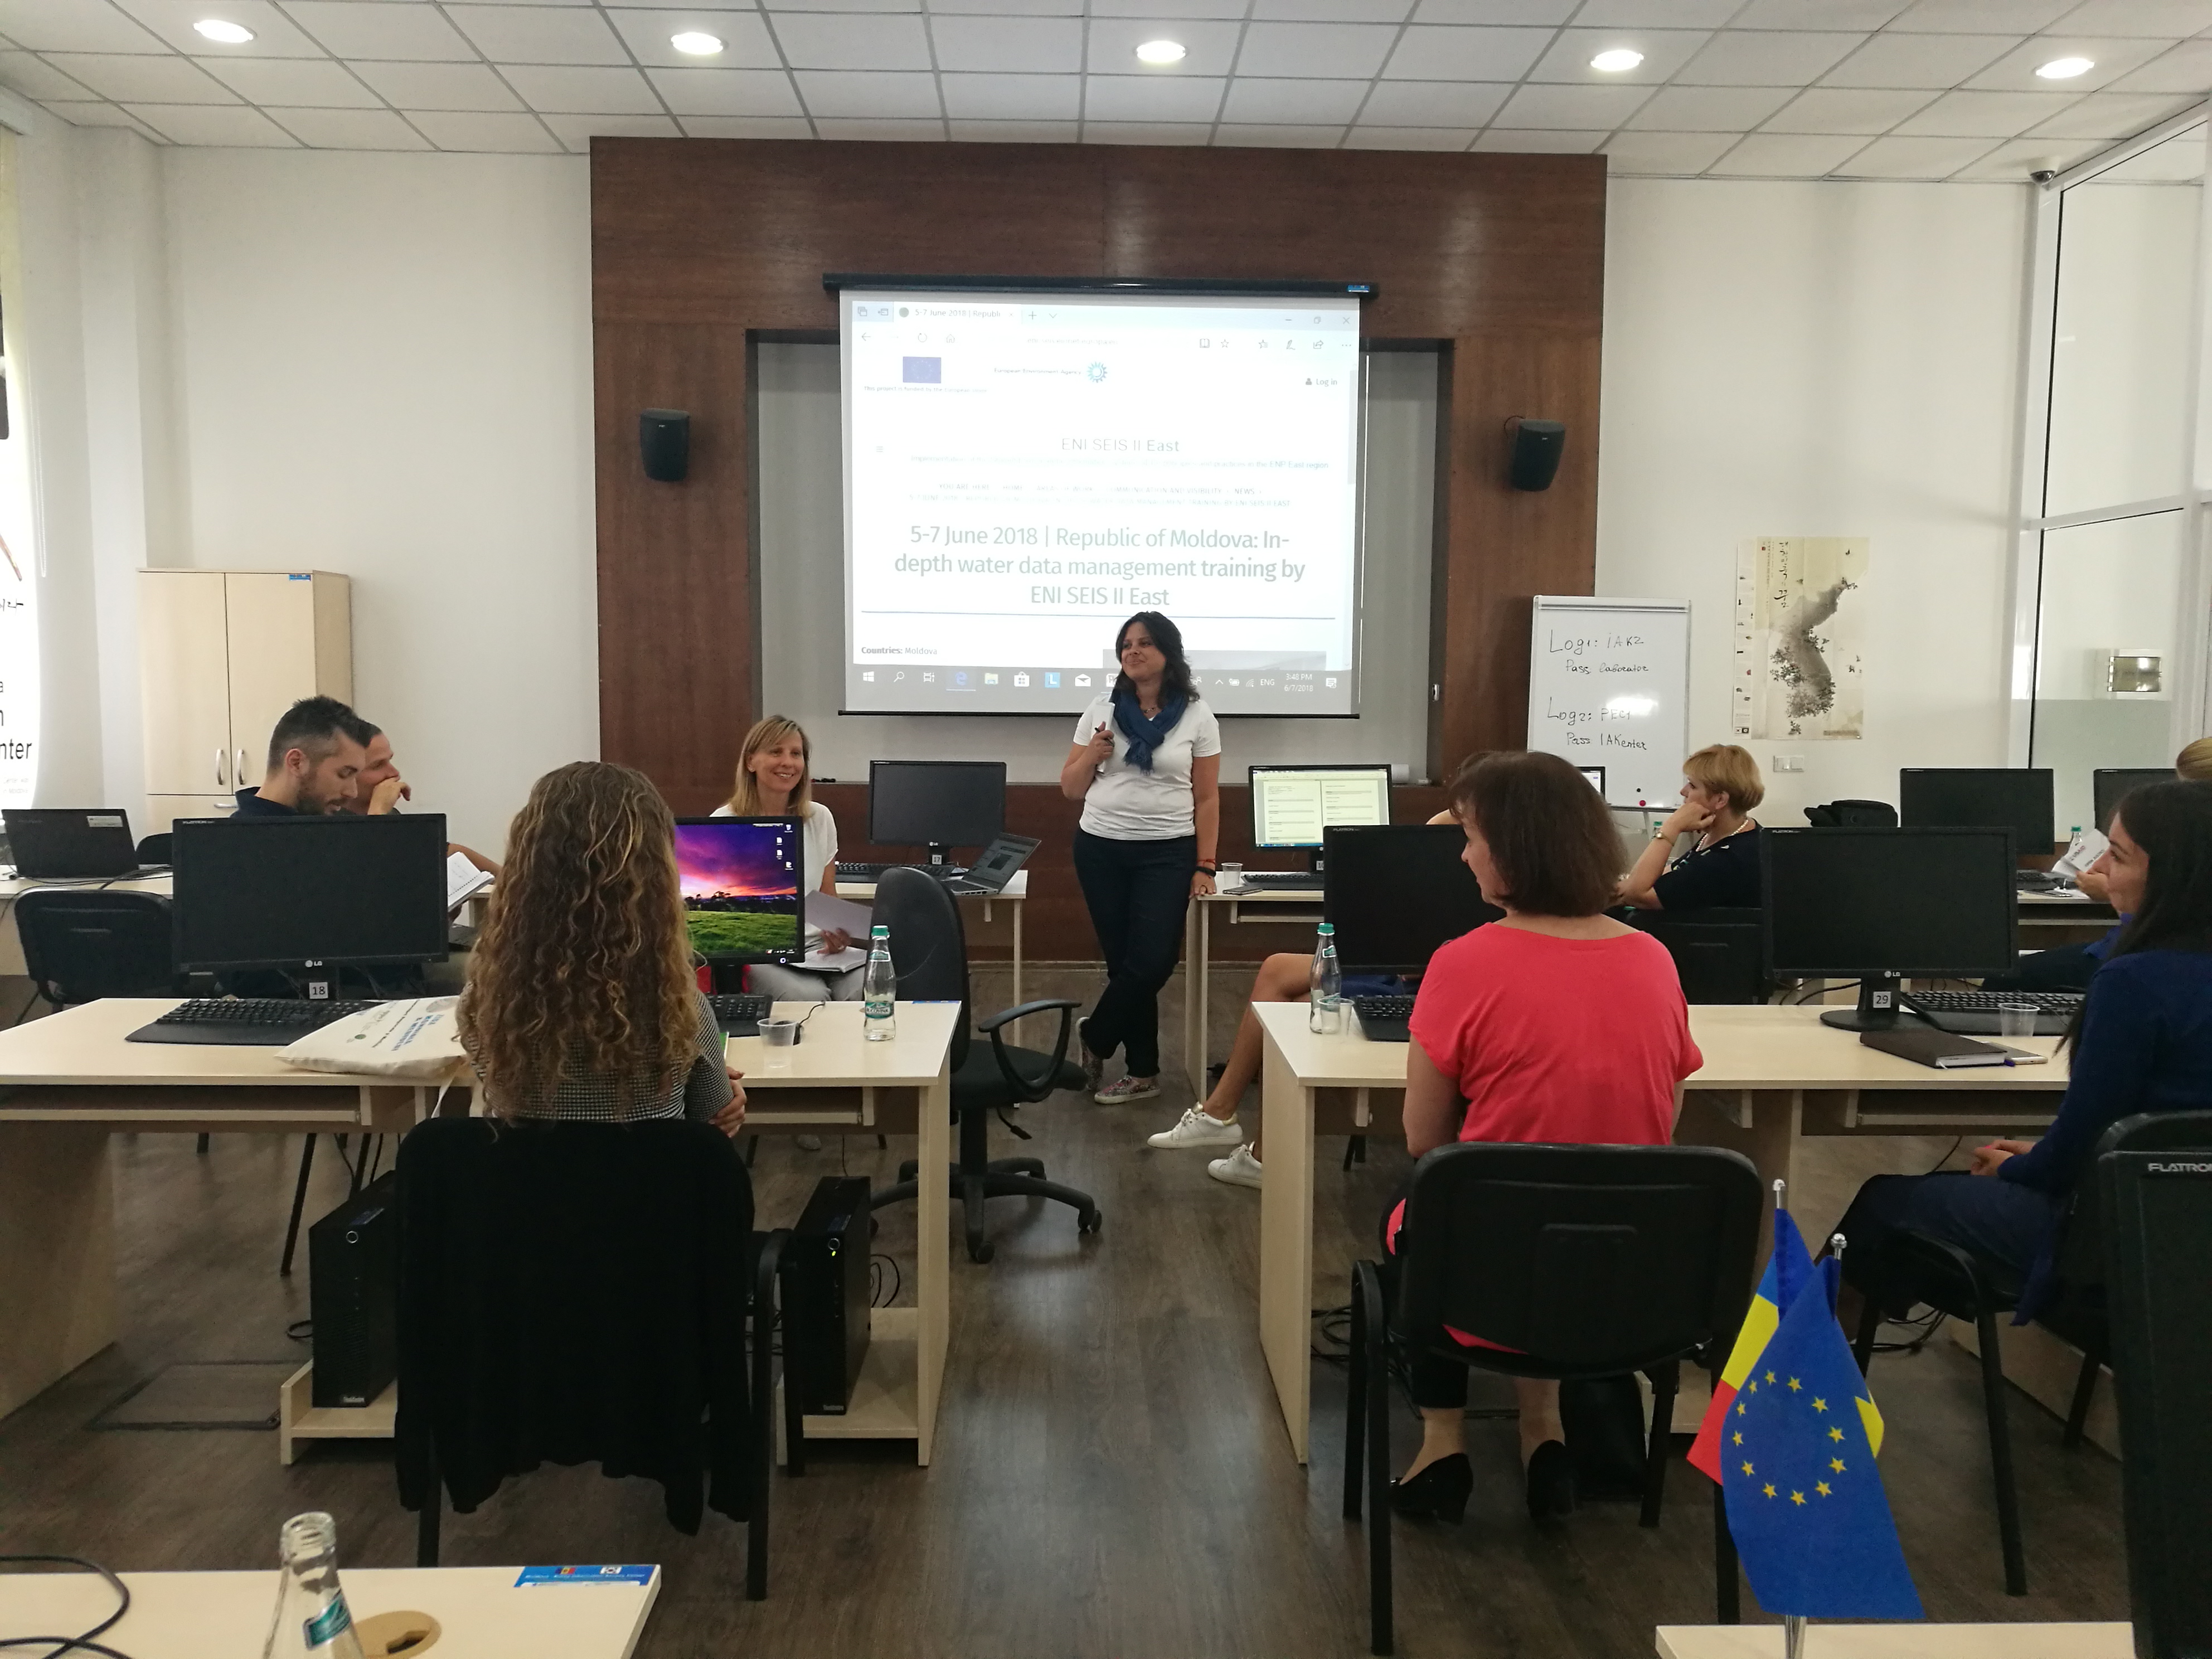 5-7 June 2018 | Republic of Moldova: In-depth water data management training by ENI SEIS II East